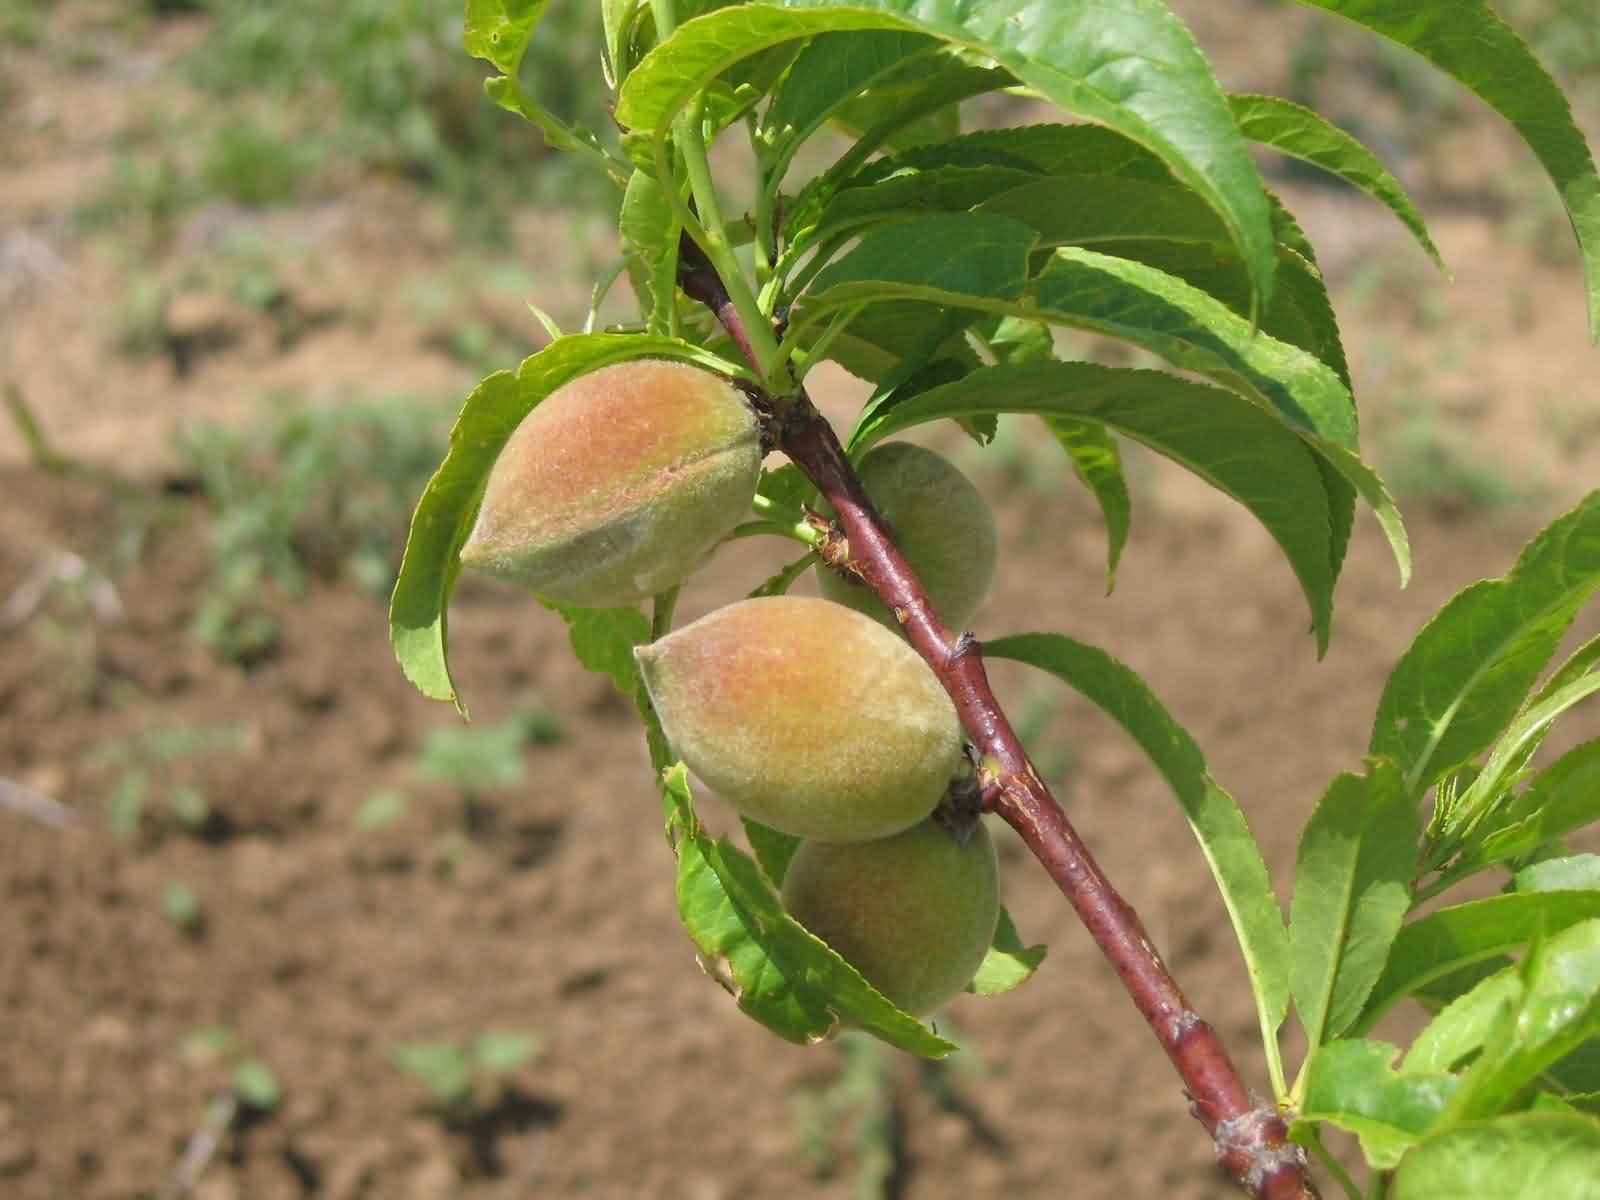 Orchard plantation fast becoming a favorite among Jammu and Kashmir farmers